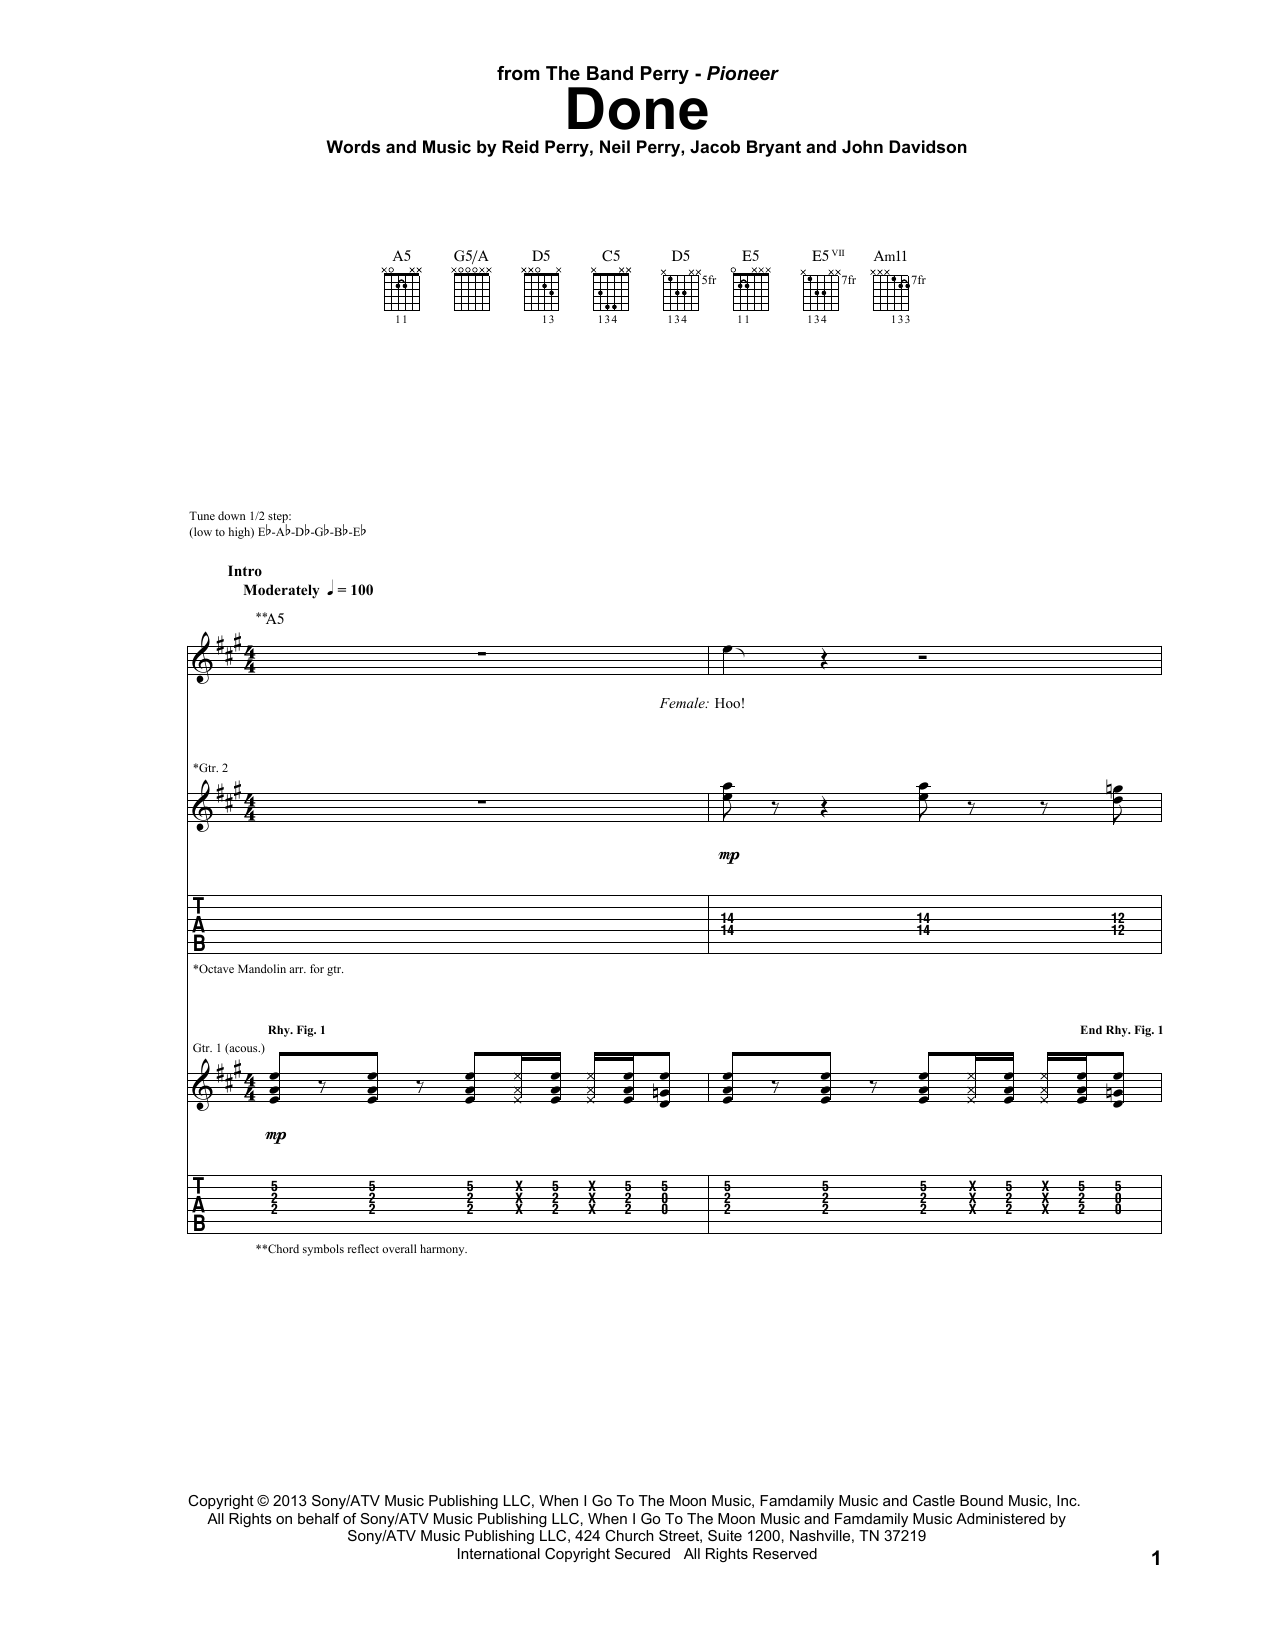 Download The Band Perry Done Sheet Music